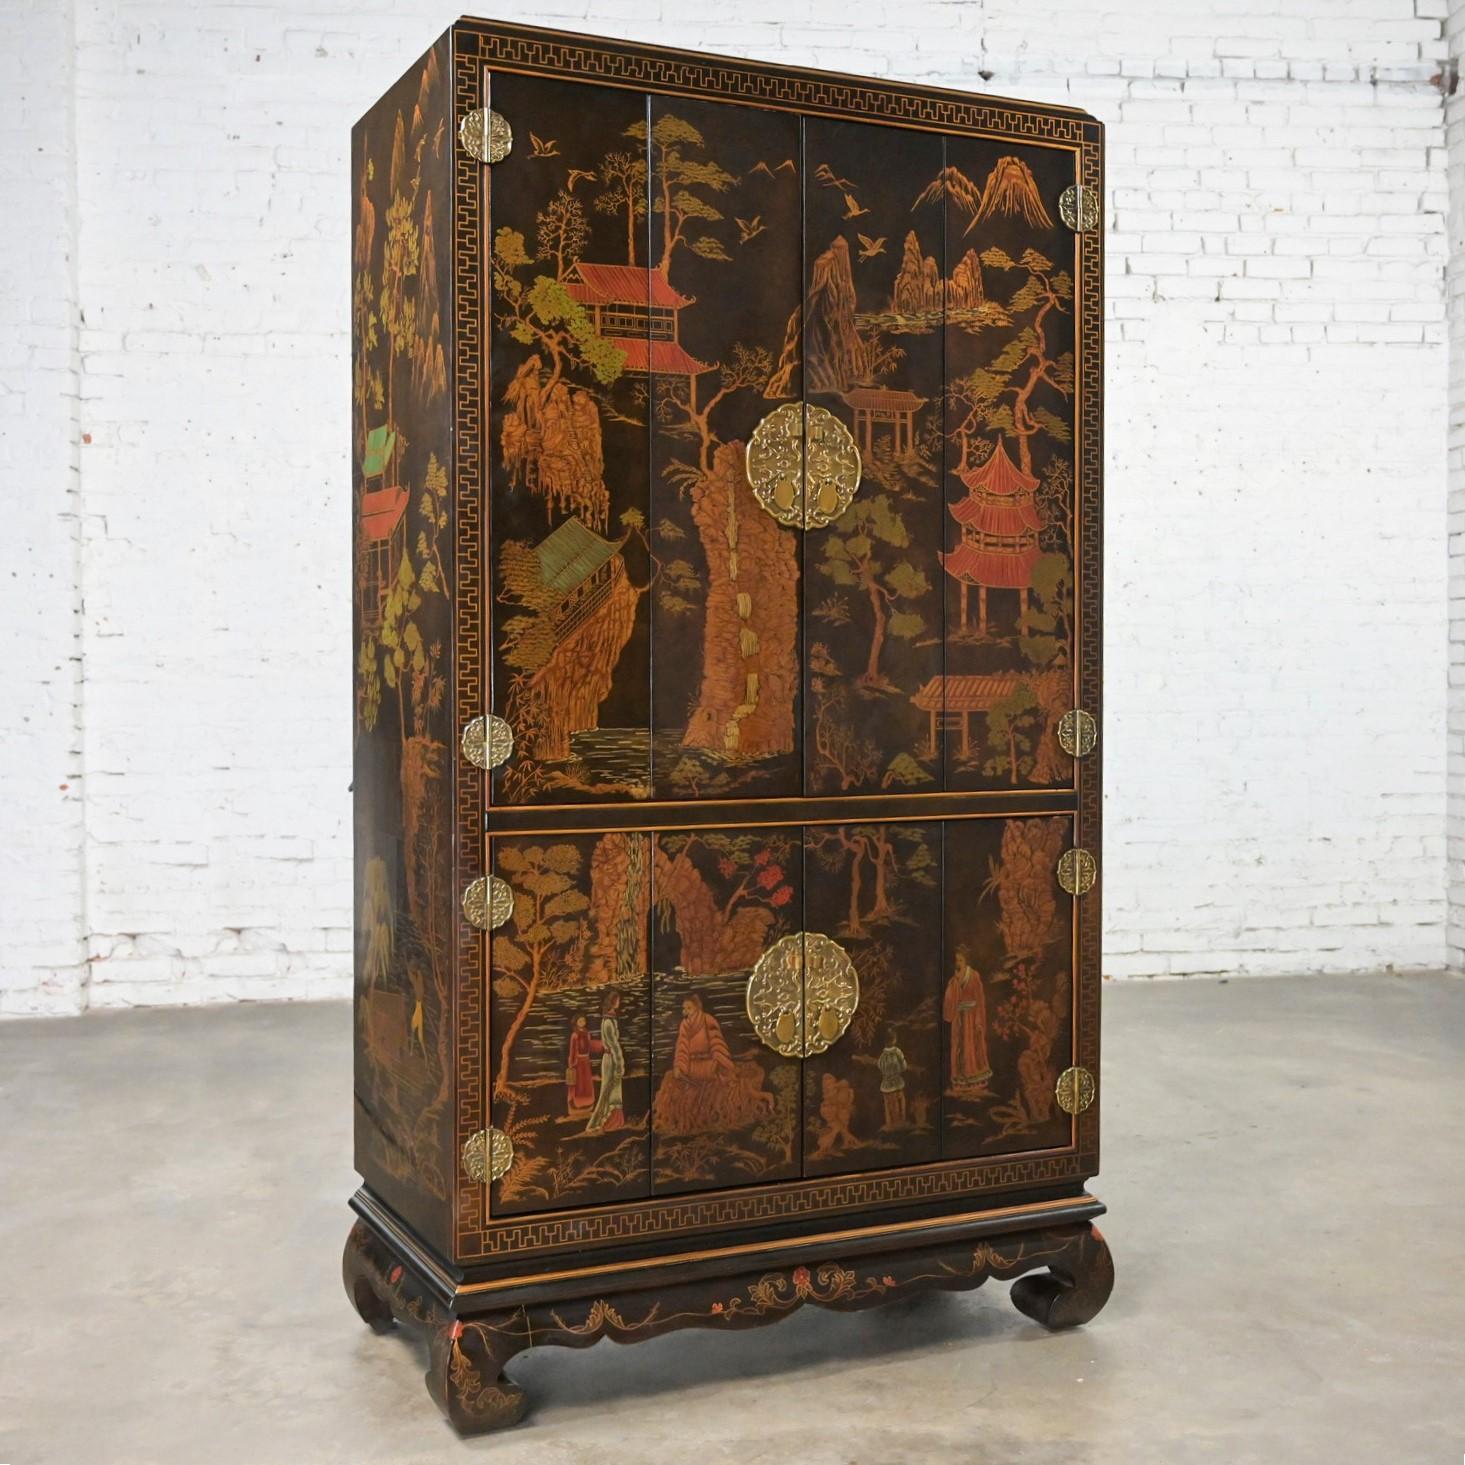 Henredon Folio 10 Chinoiserie Entertainment Storage Armoire Painted Scenic Desig In Good Condition For Sale In Topeka, KS